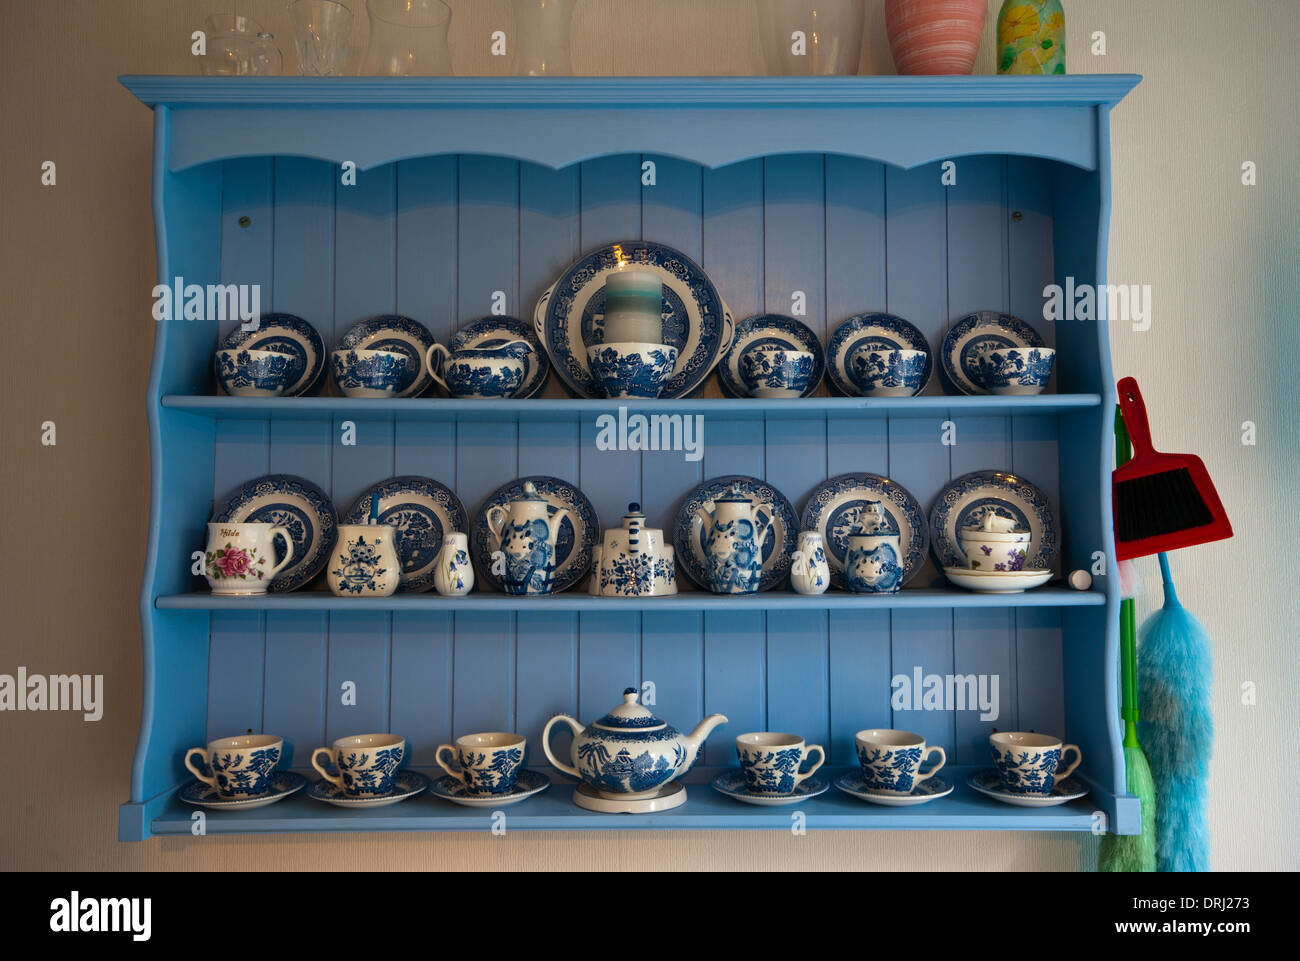 Wooden Wall Display Unit With Blue and White Crockery Stock Photo